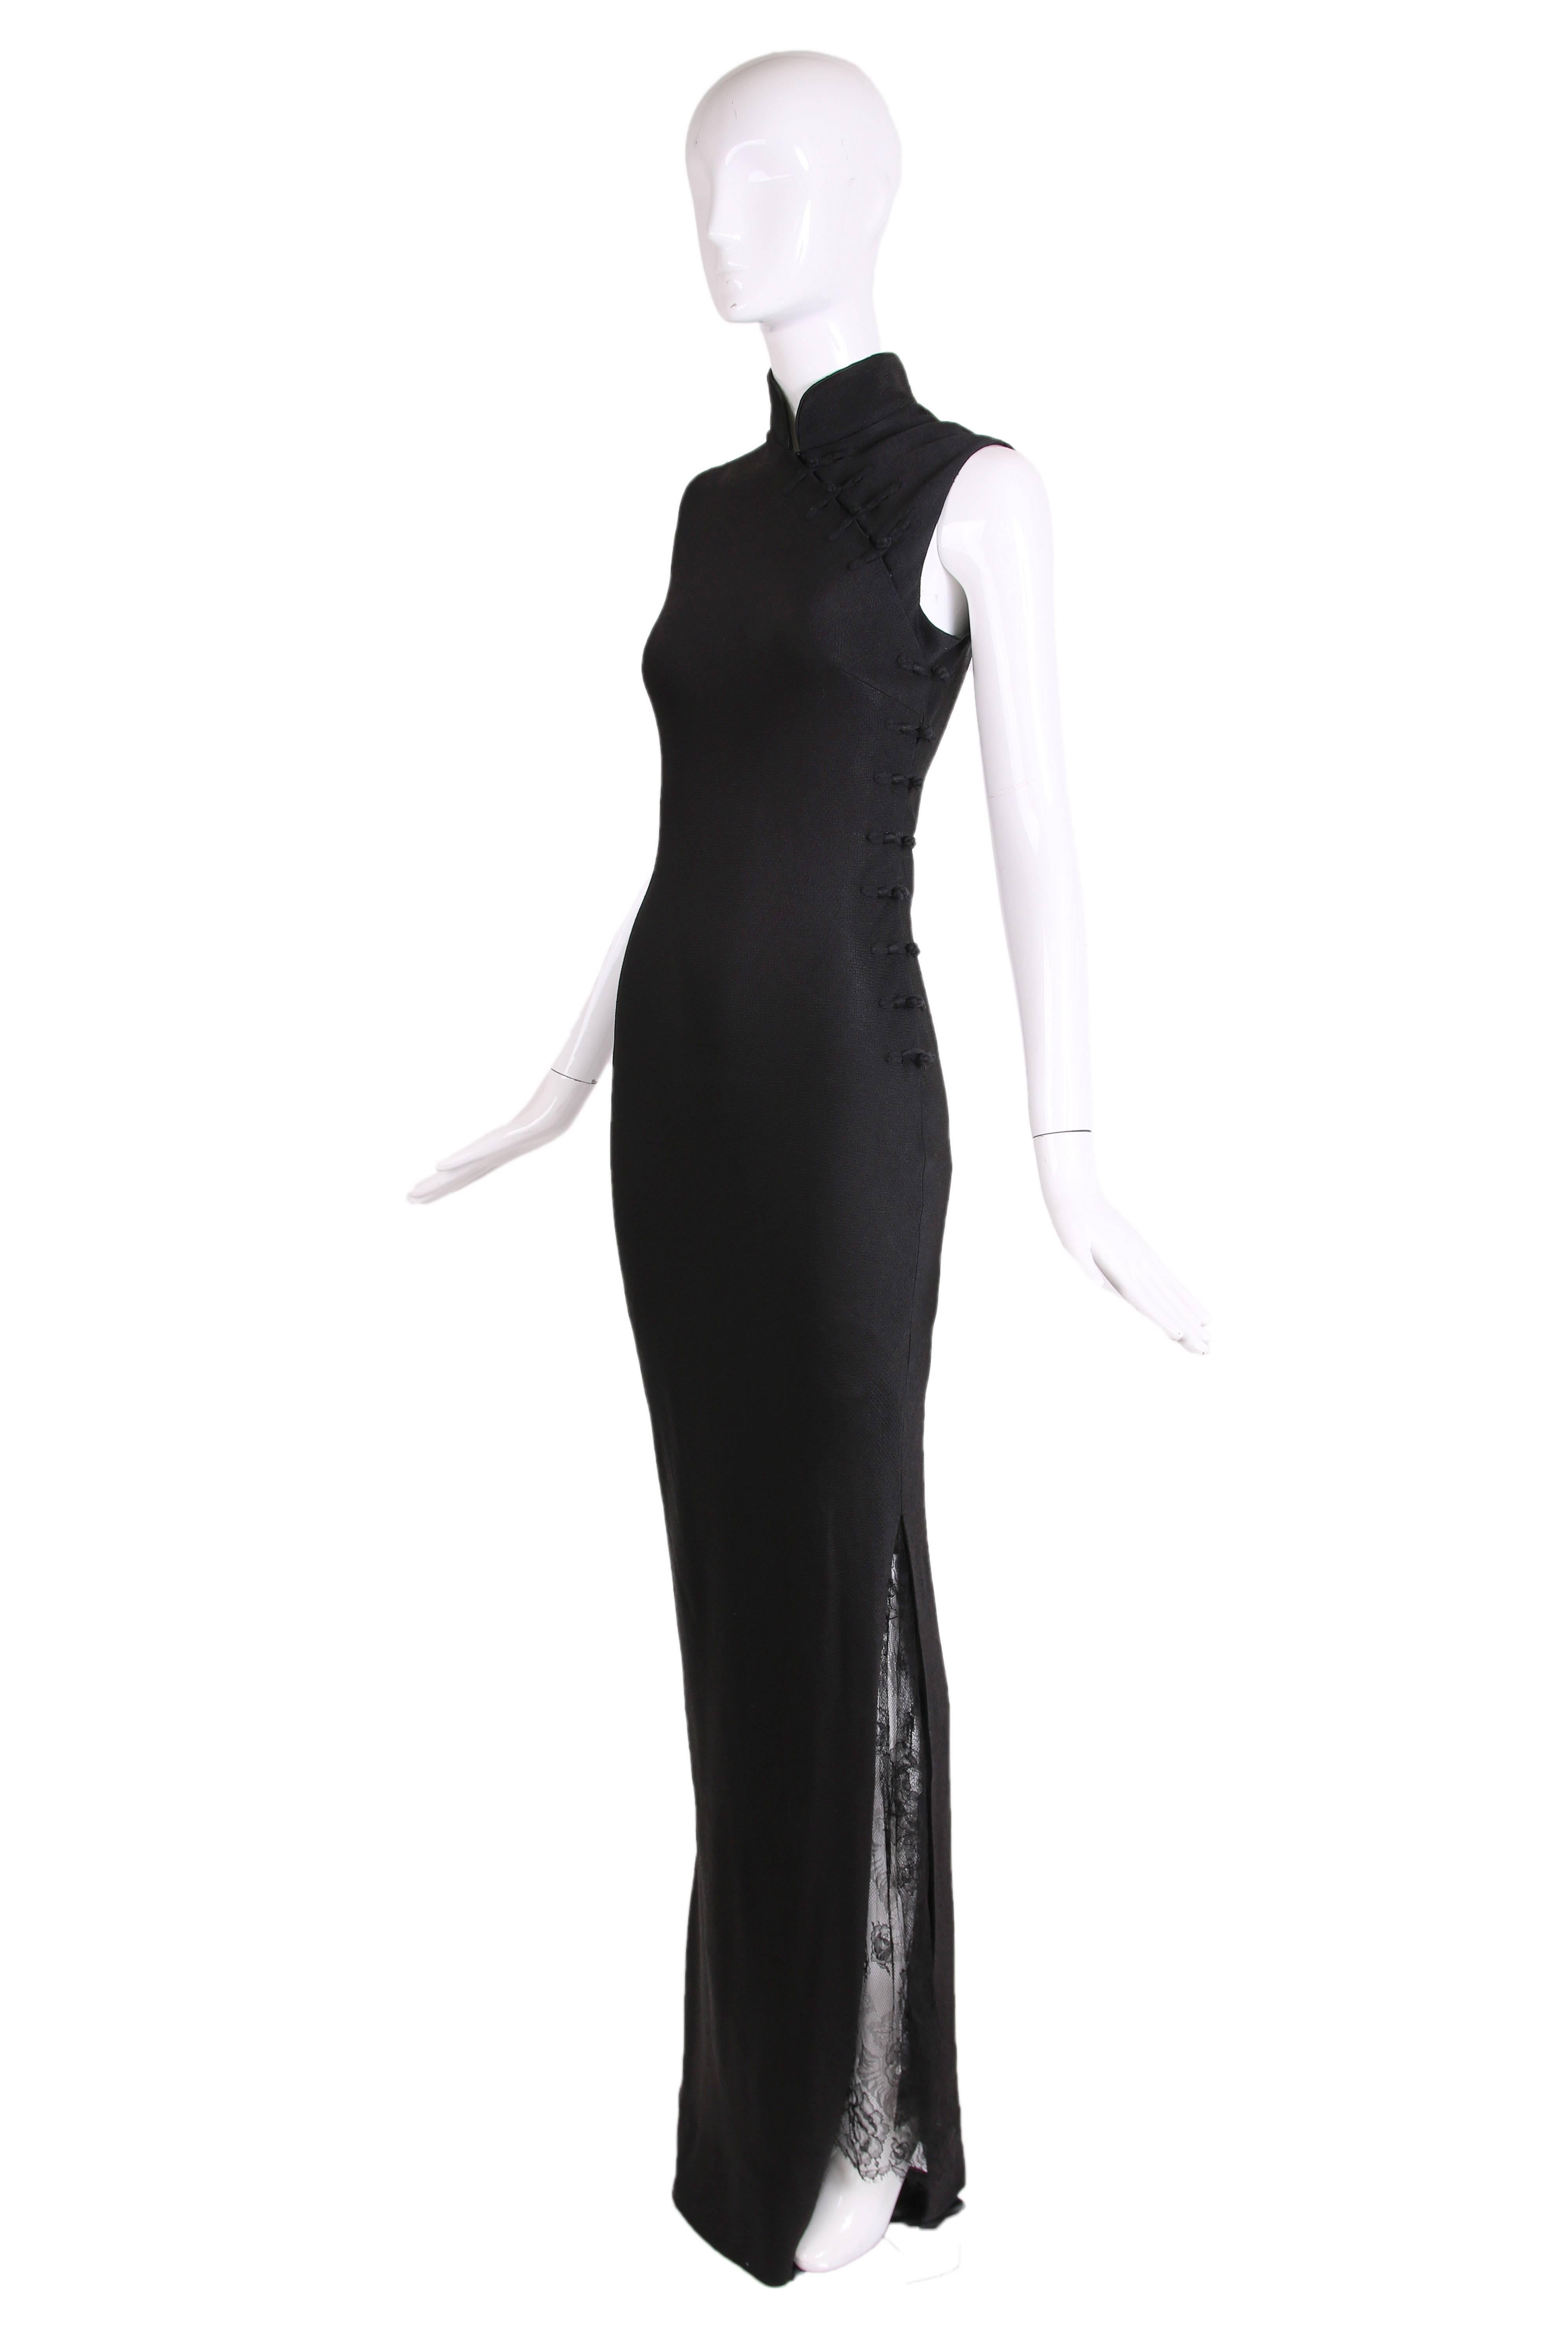 Dior by Galliano black bias-cut sleeveless evening gown w/Asian inspired collar and closures. No fabric tag but feels like a silk or silk blend. There is a dramatic side slit which has a lace inset. In excellent condition. No size tag, please see